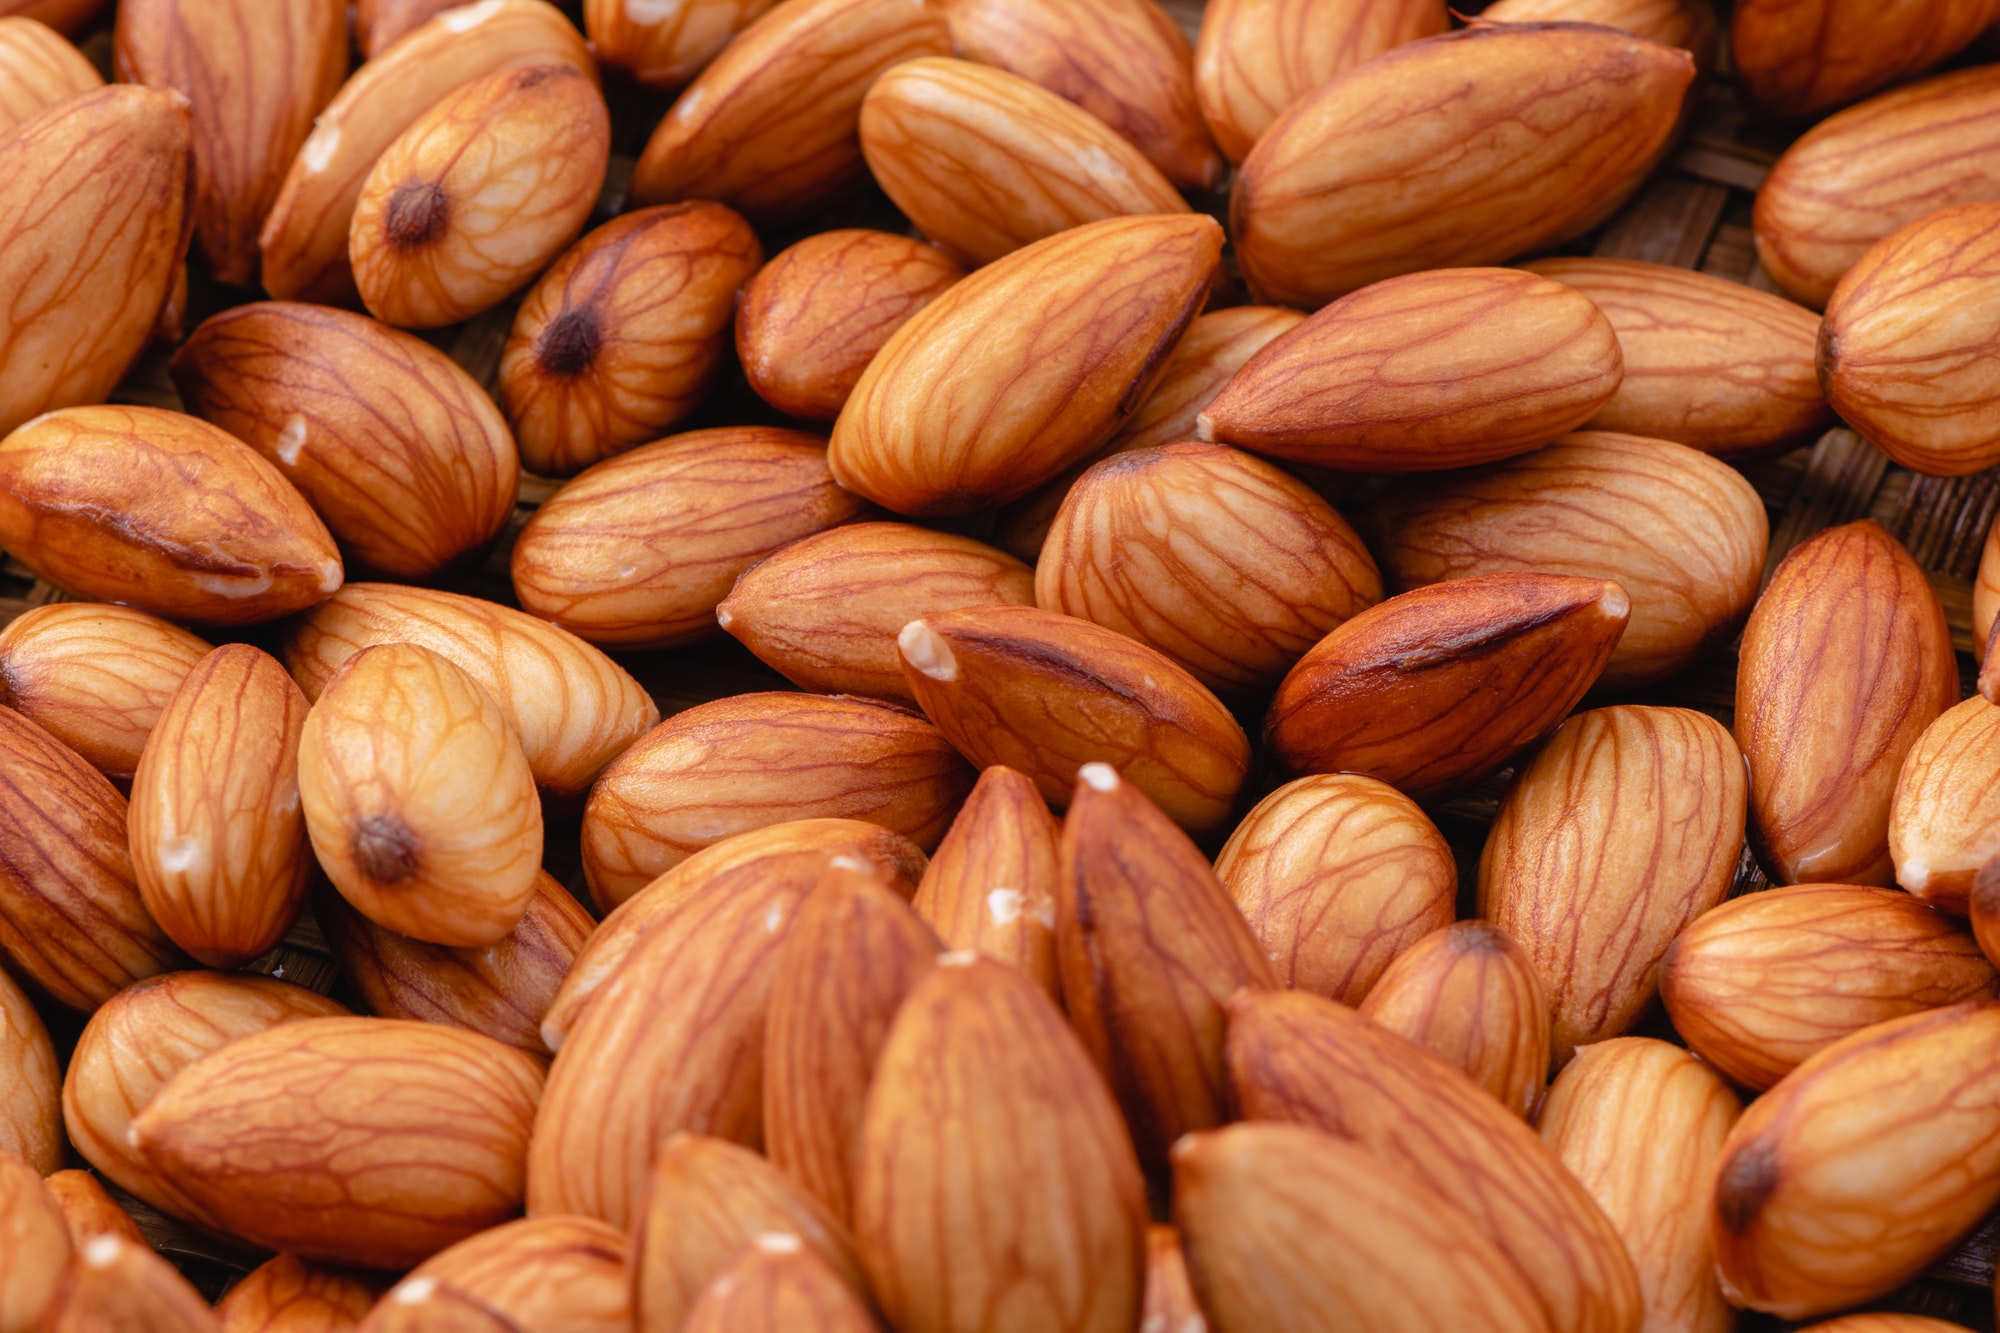 Almond beans soak in water overnight to get the most benefits before to made almond milk